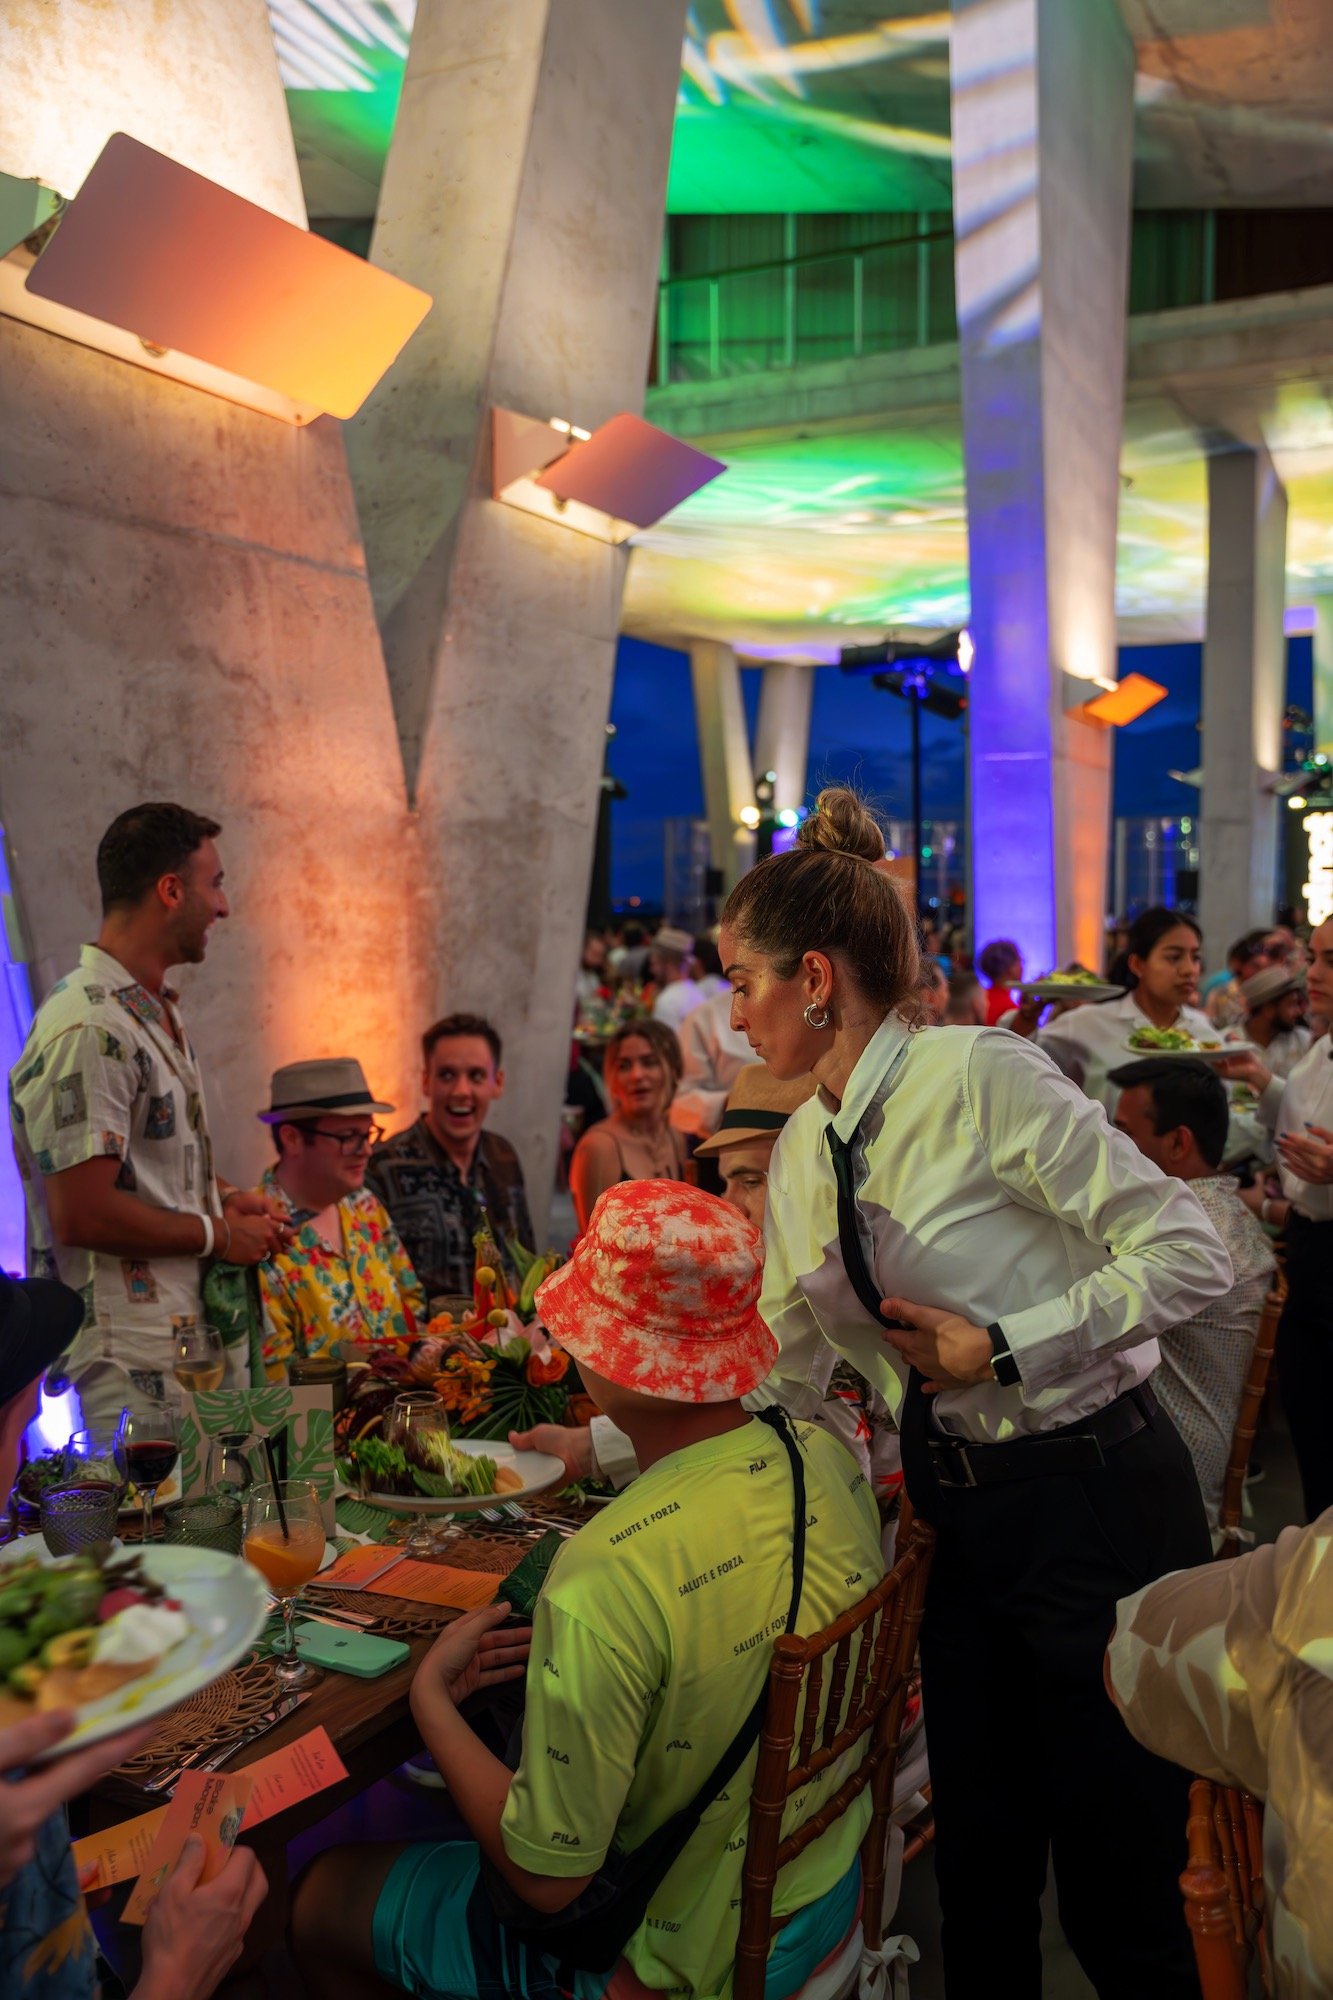 Catering for Corporate event in Miami - Thierry isambert - Whatnot Dinner 12.JPG